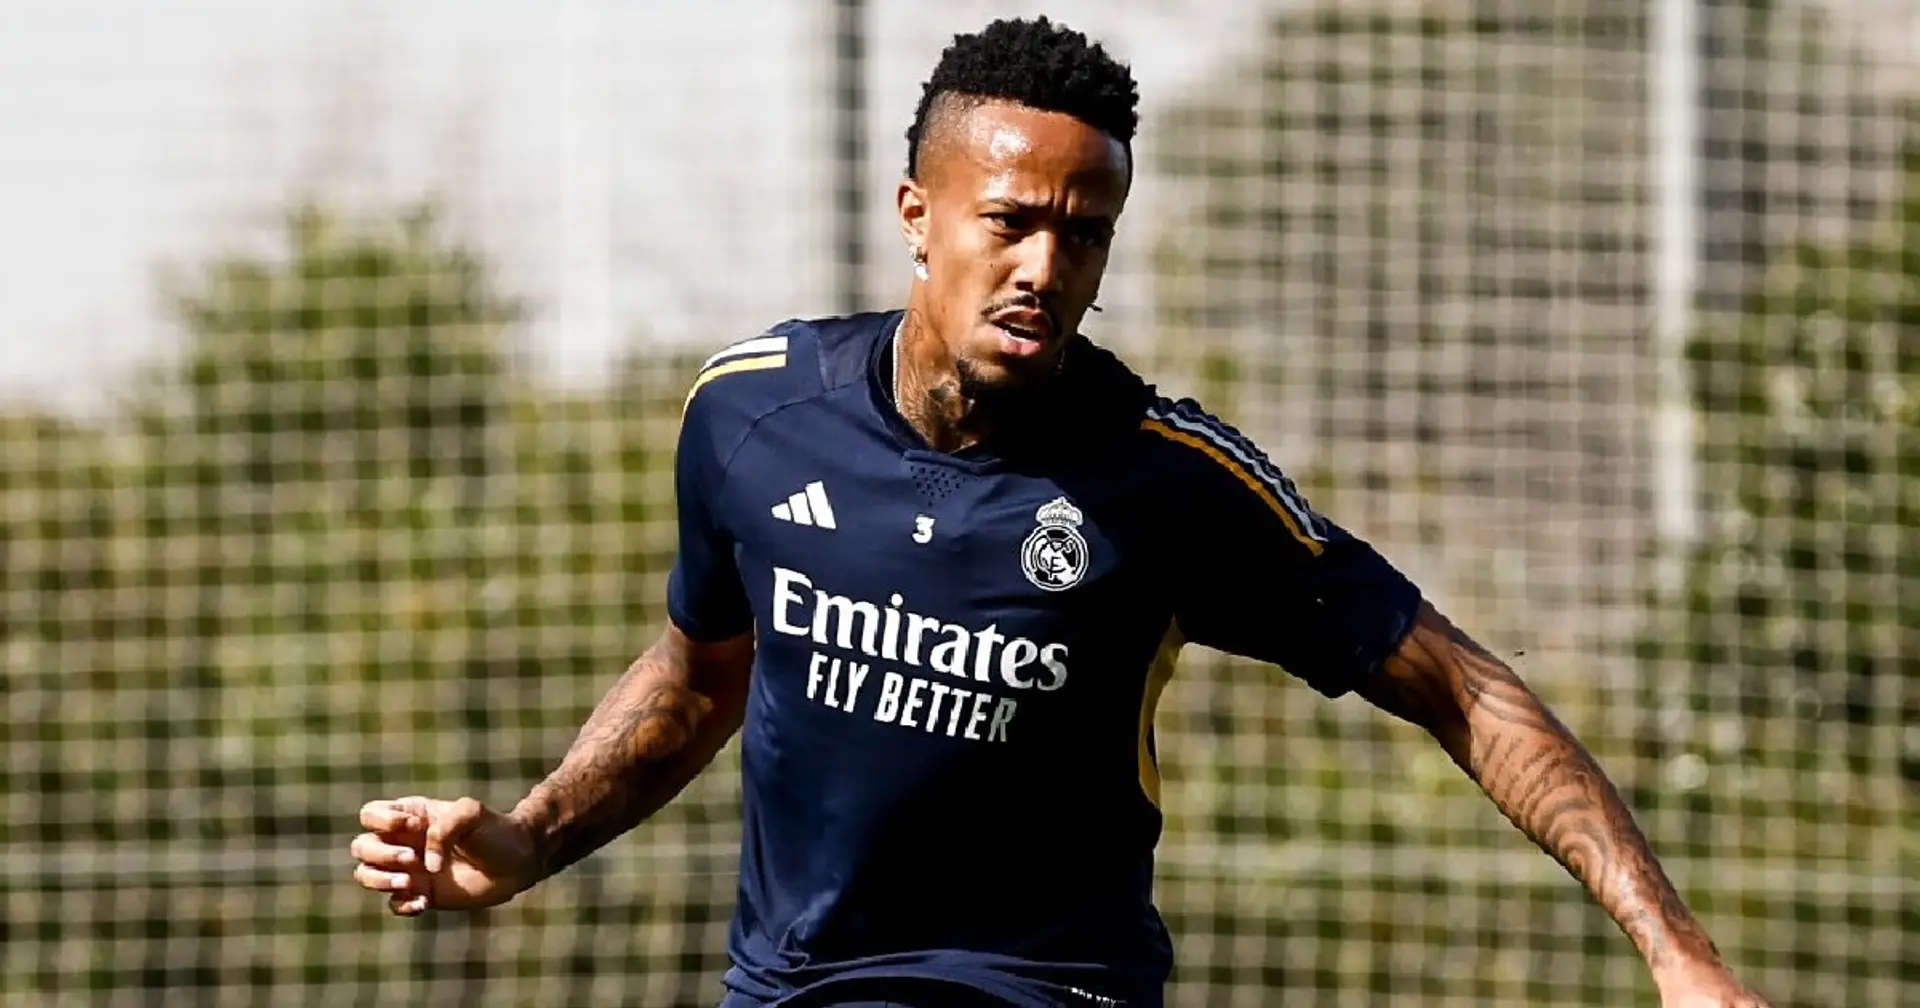 Eder Militao returns to action after 7 months